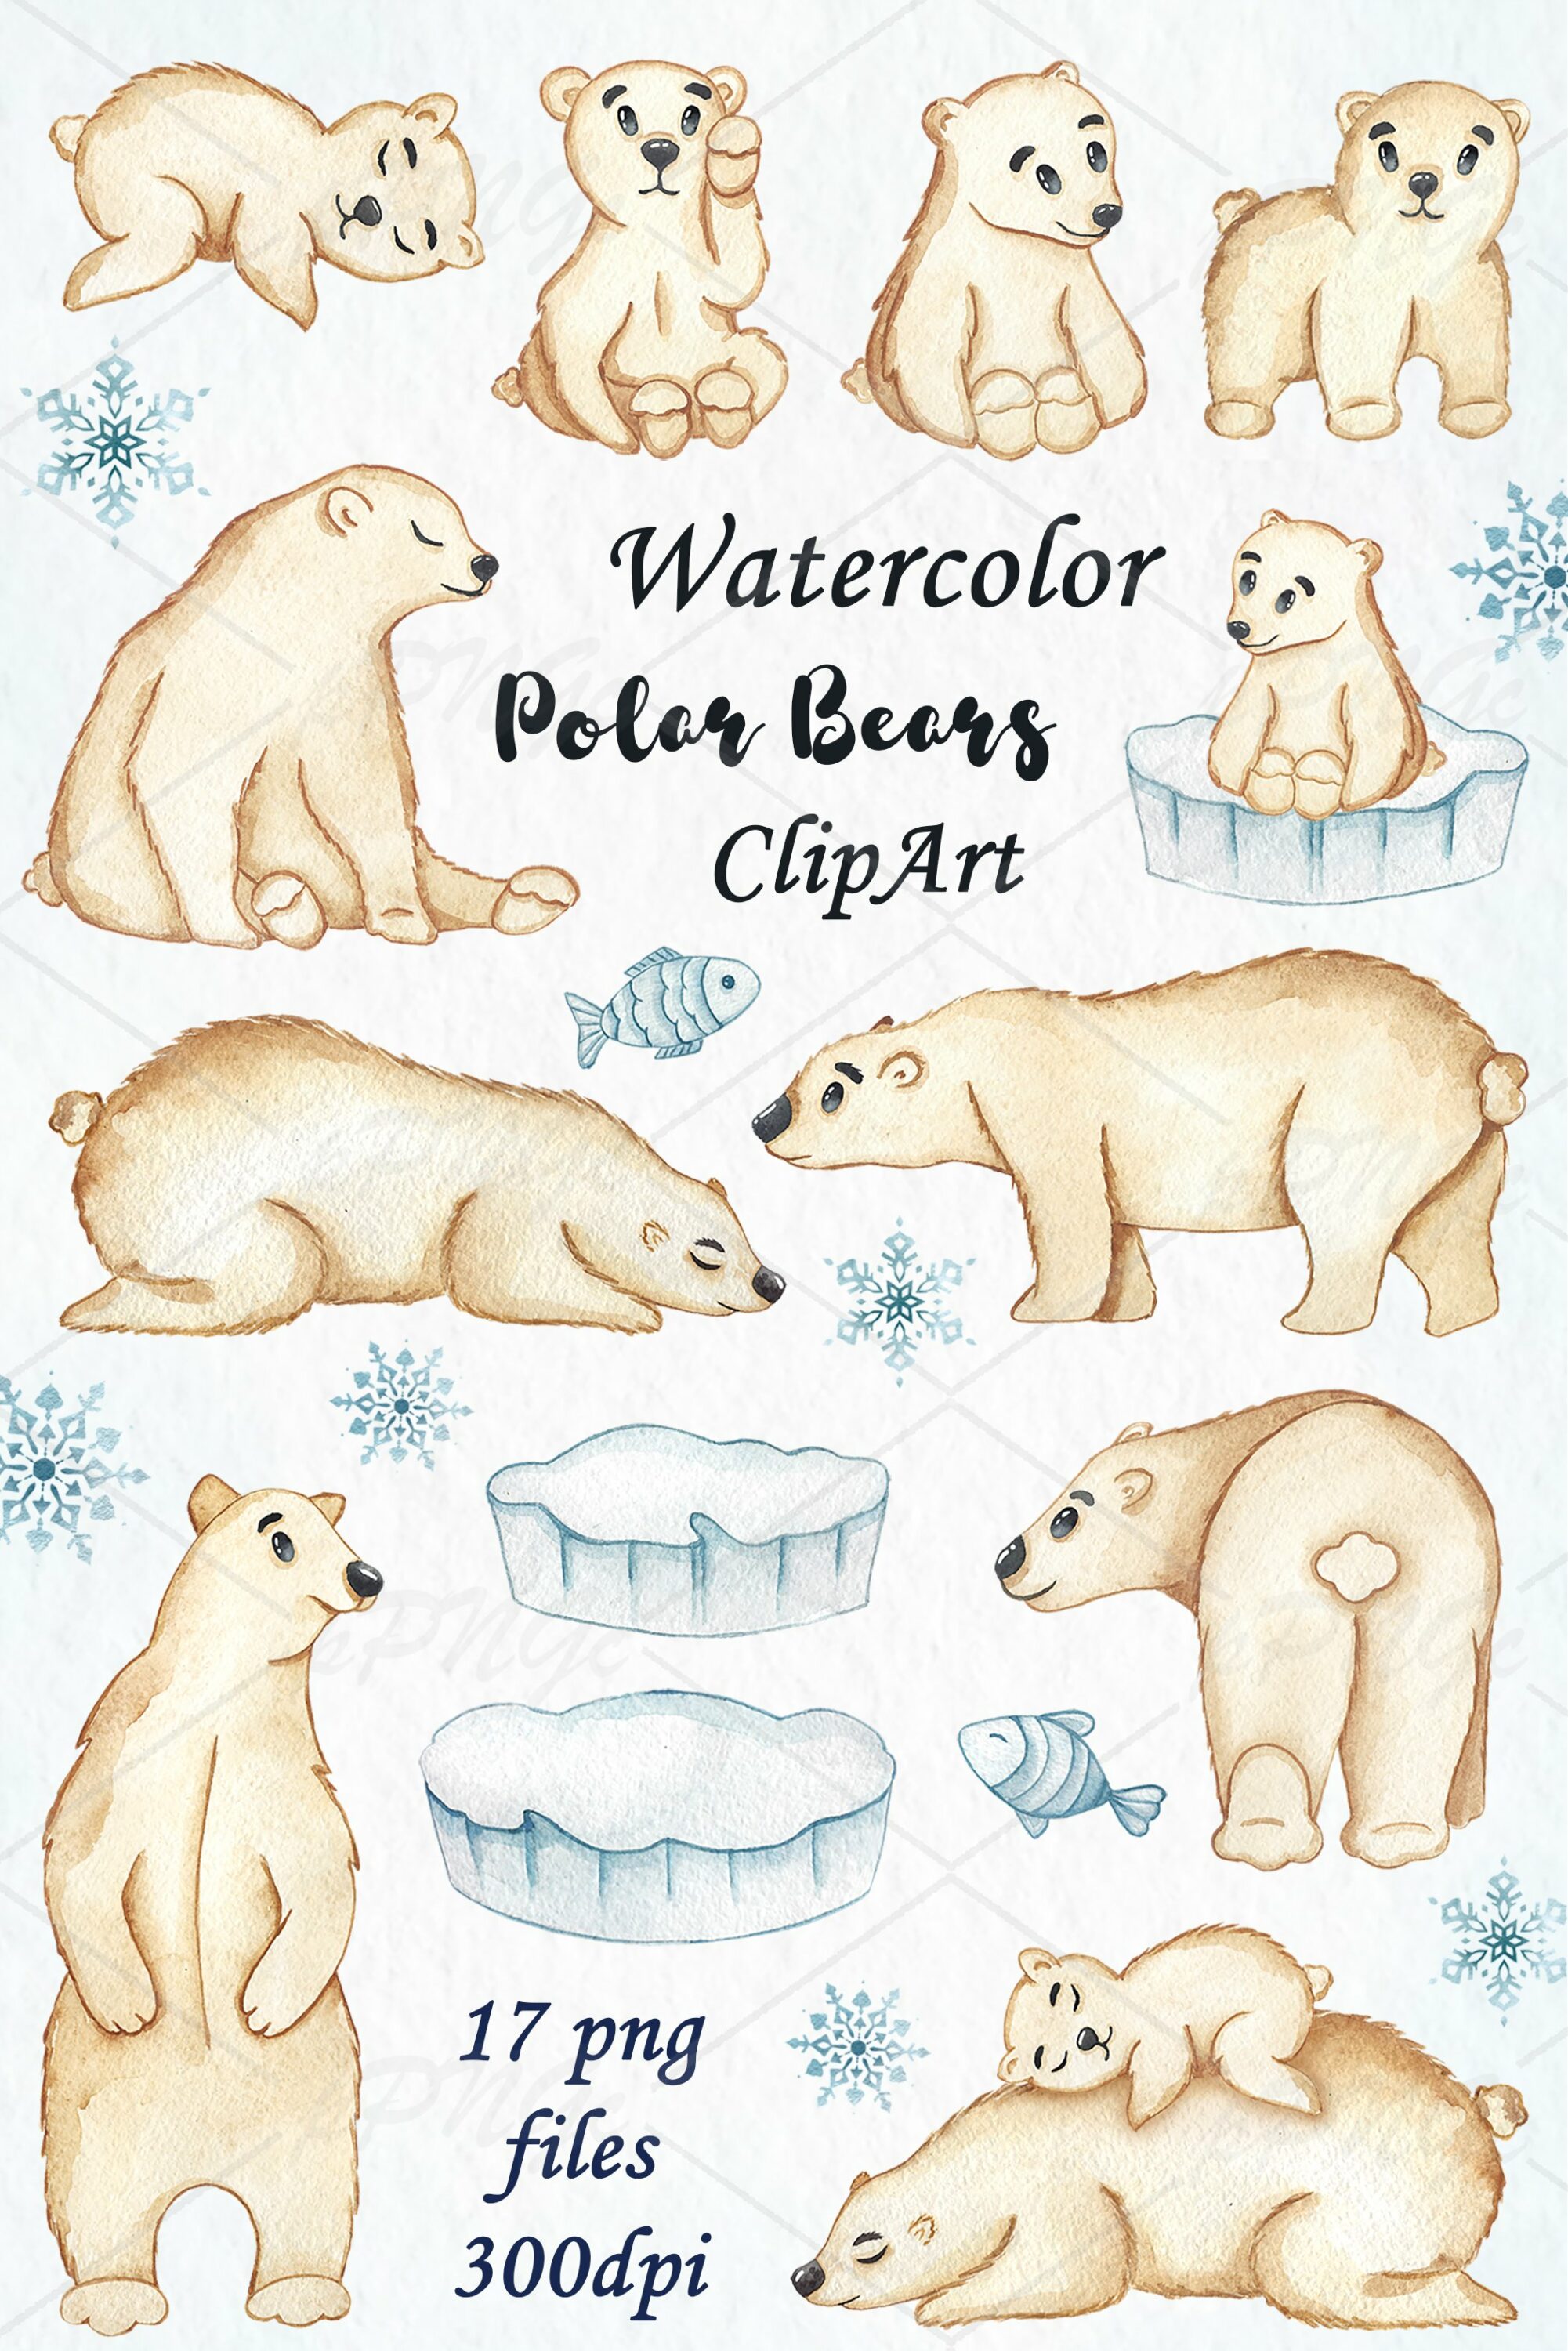 Cute watercolor sollection with white polar bears.